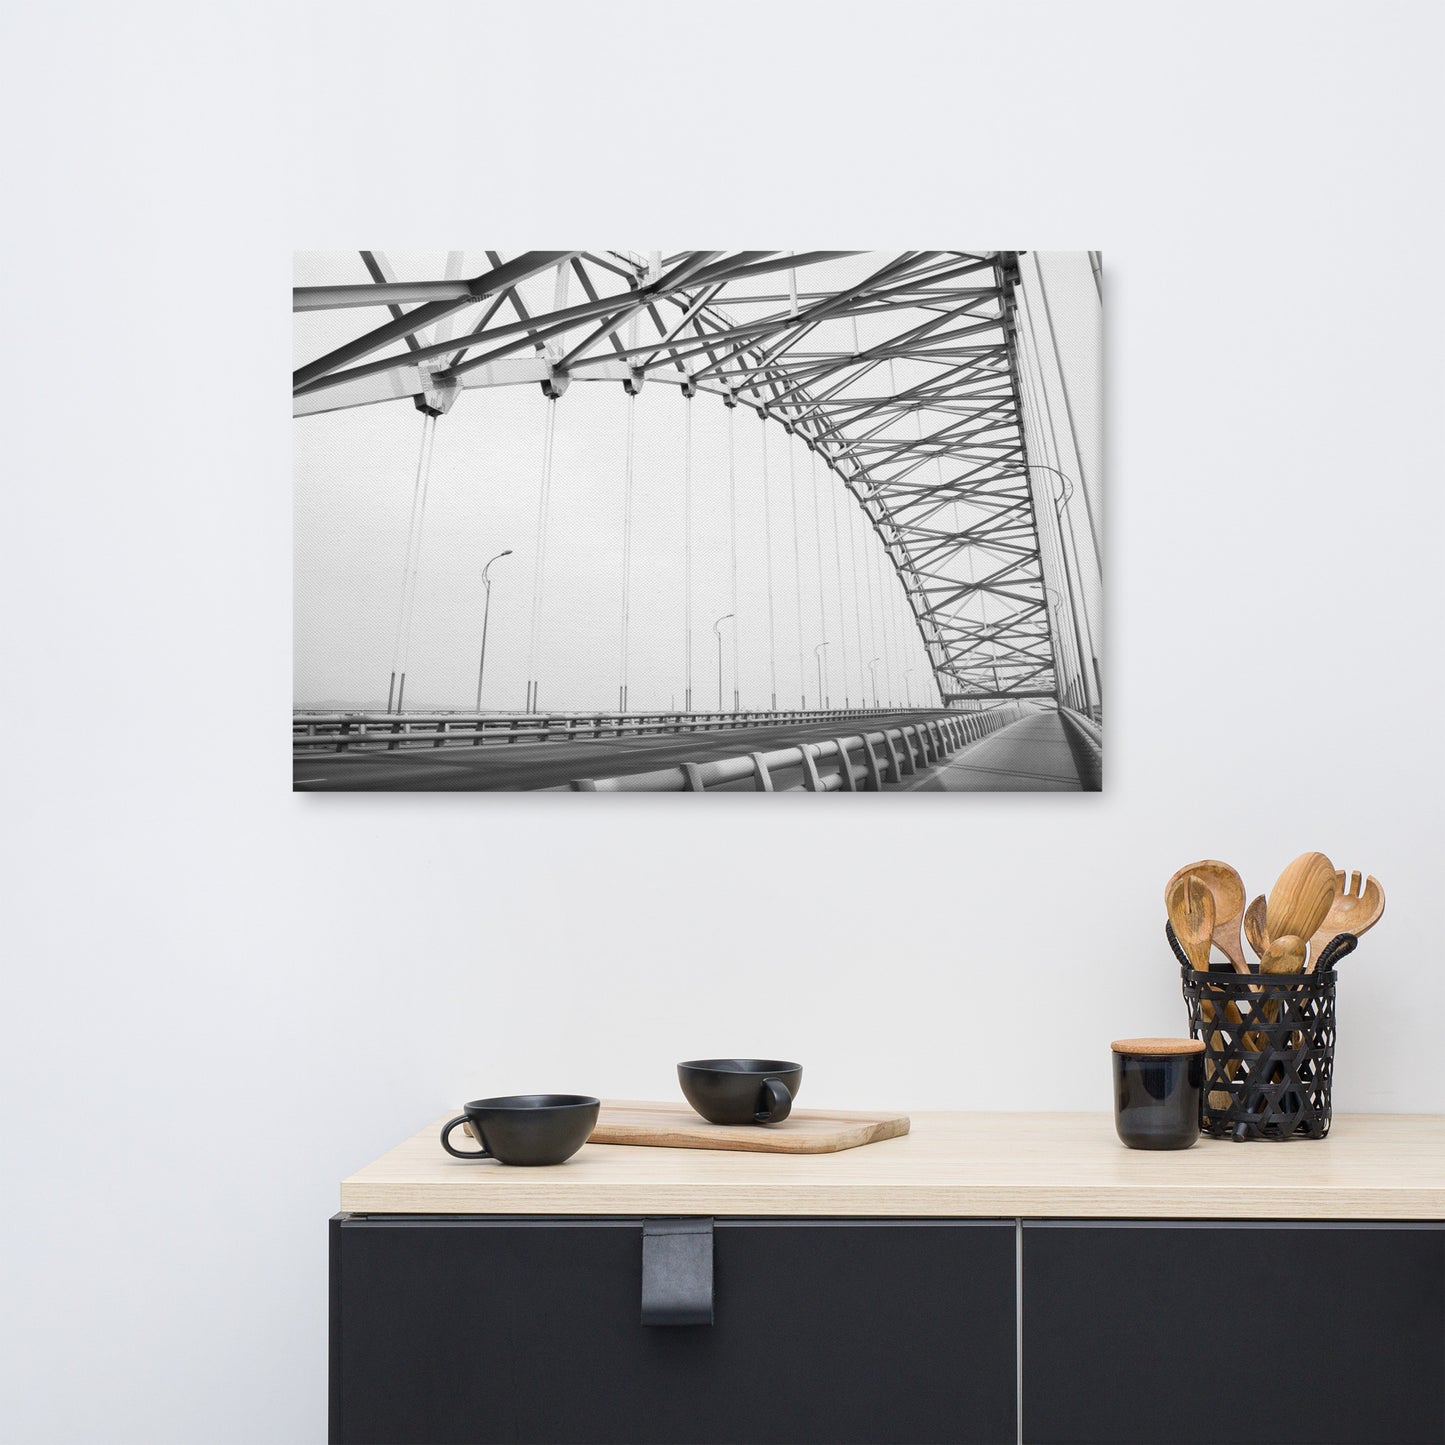 Ethereal Crossing Architectural Photograph Canvas Wall Art Print